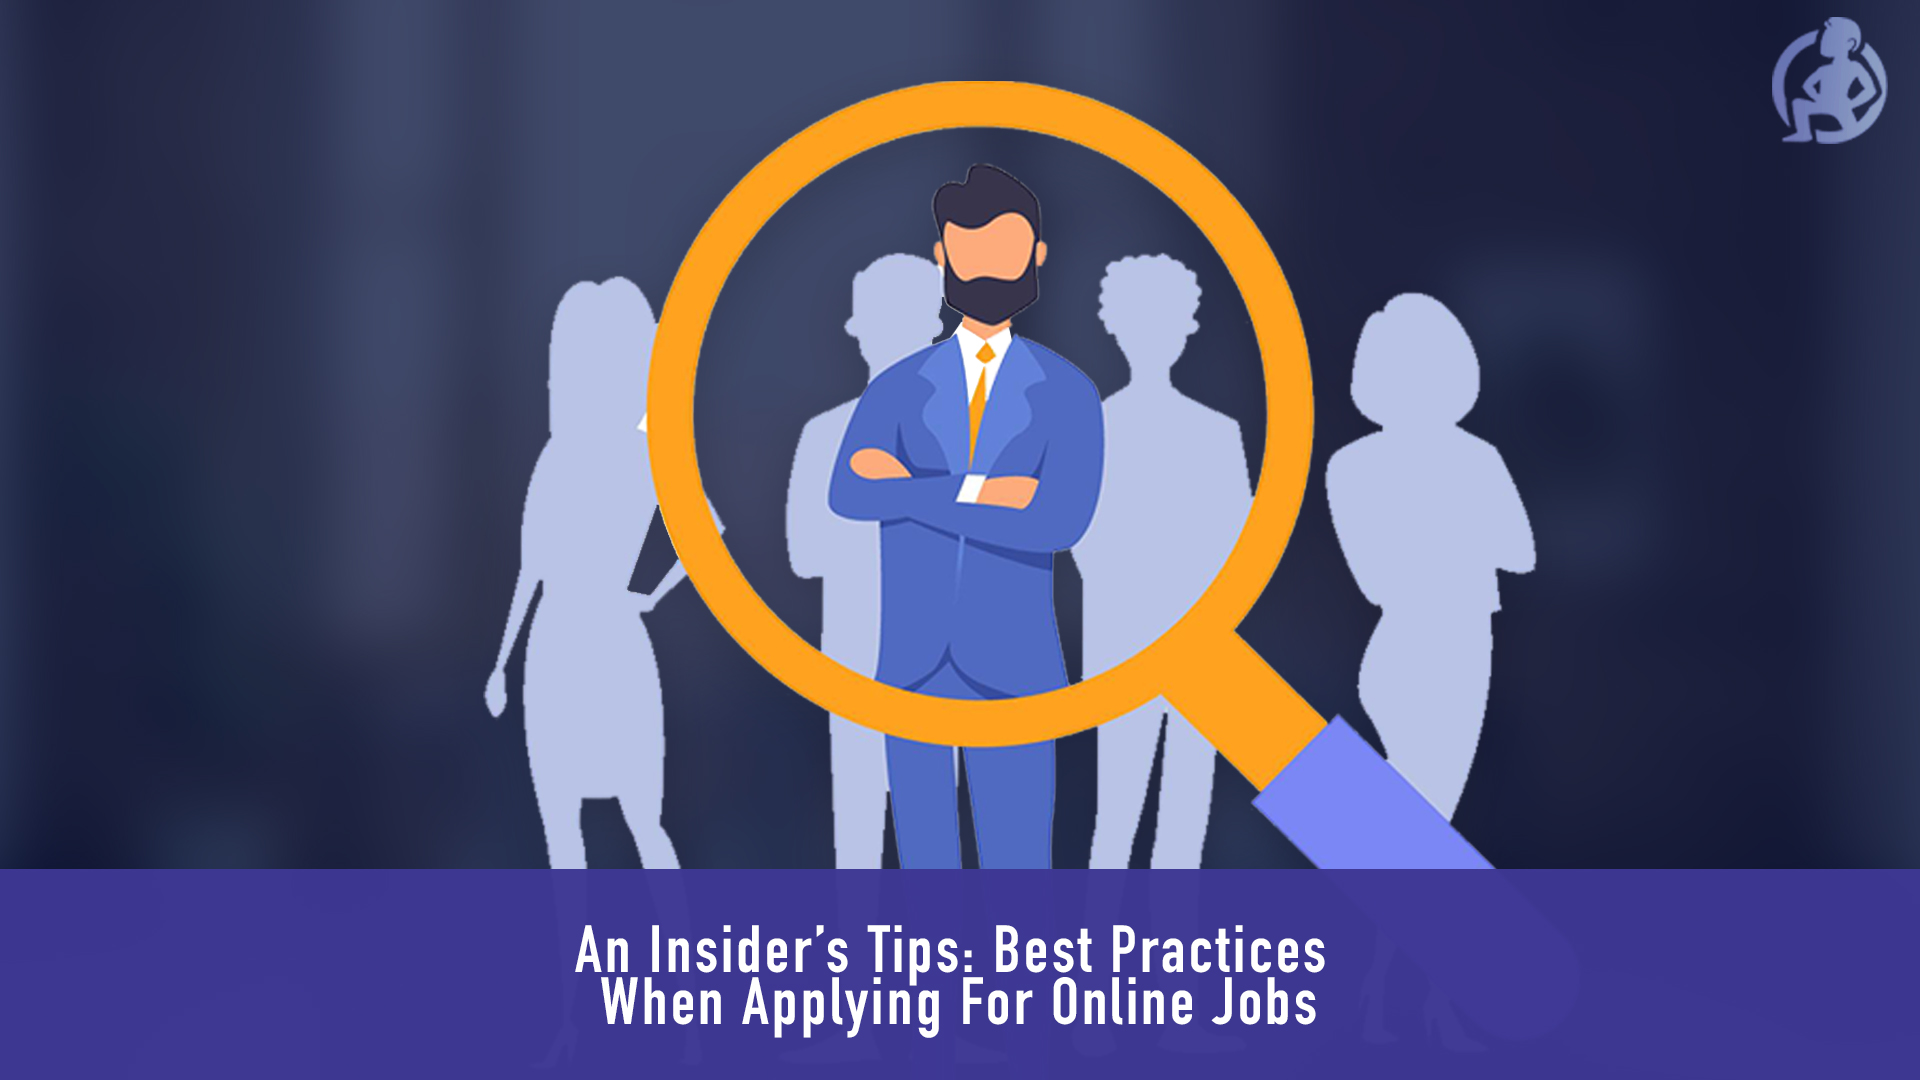 An Insider’s Tips- Best Practices When Applying For Online Jobs